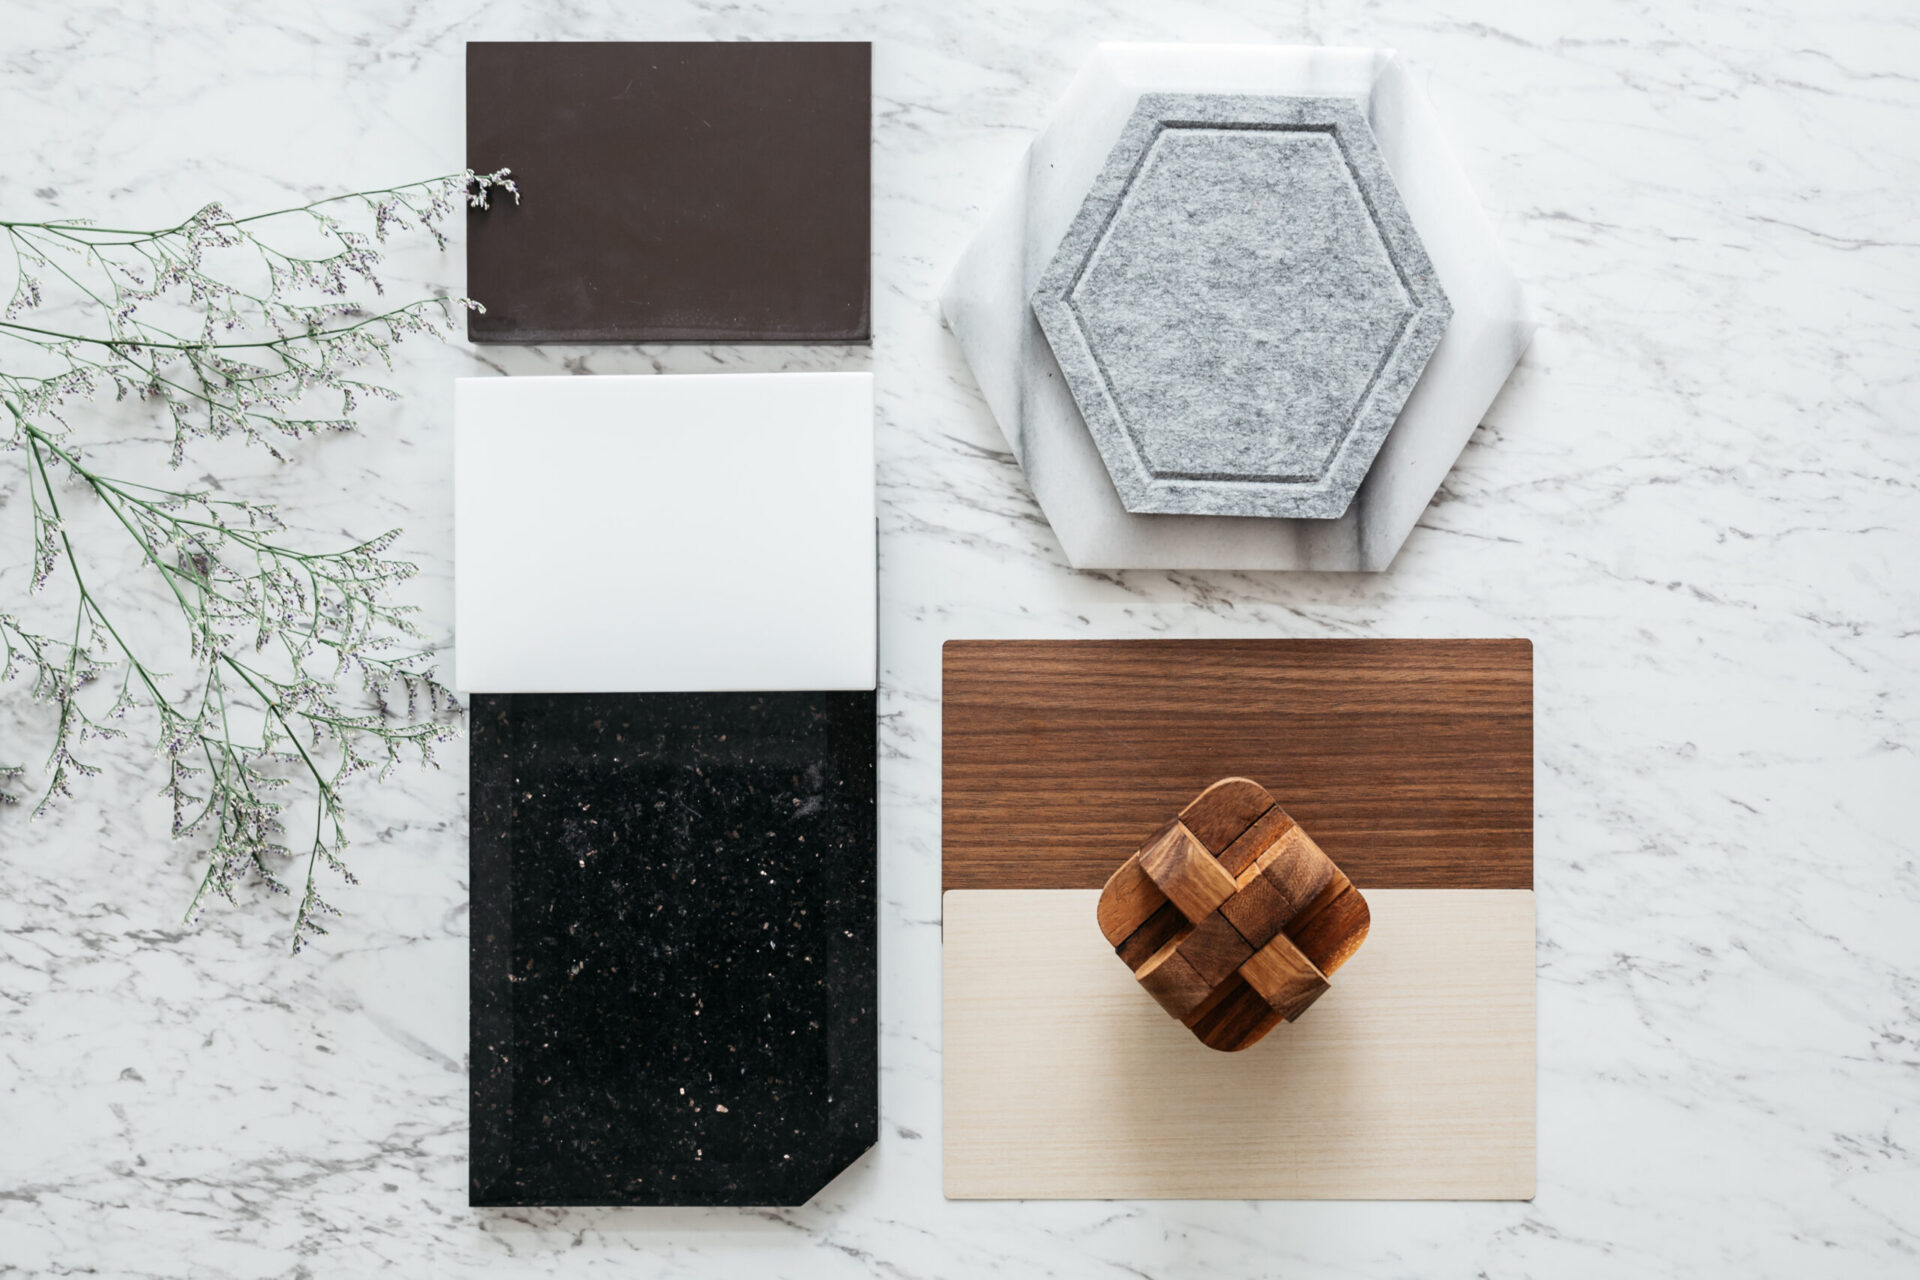 Top view of Material Selections including Granite tile, Marble tiles